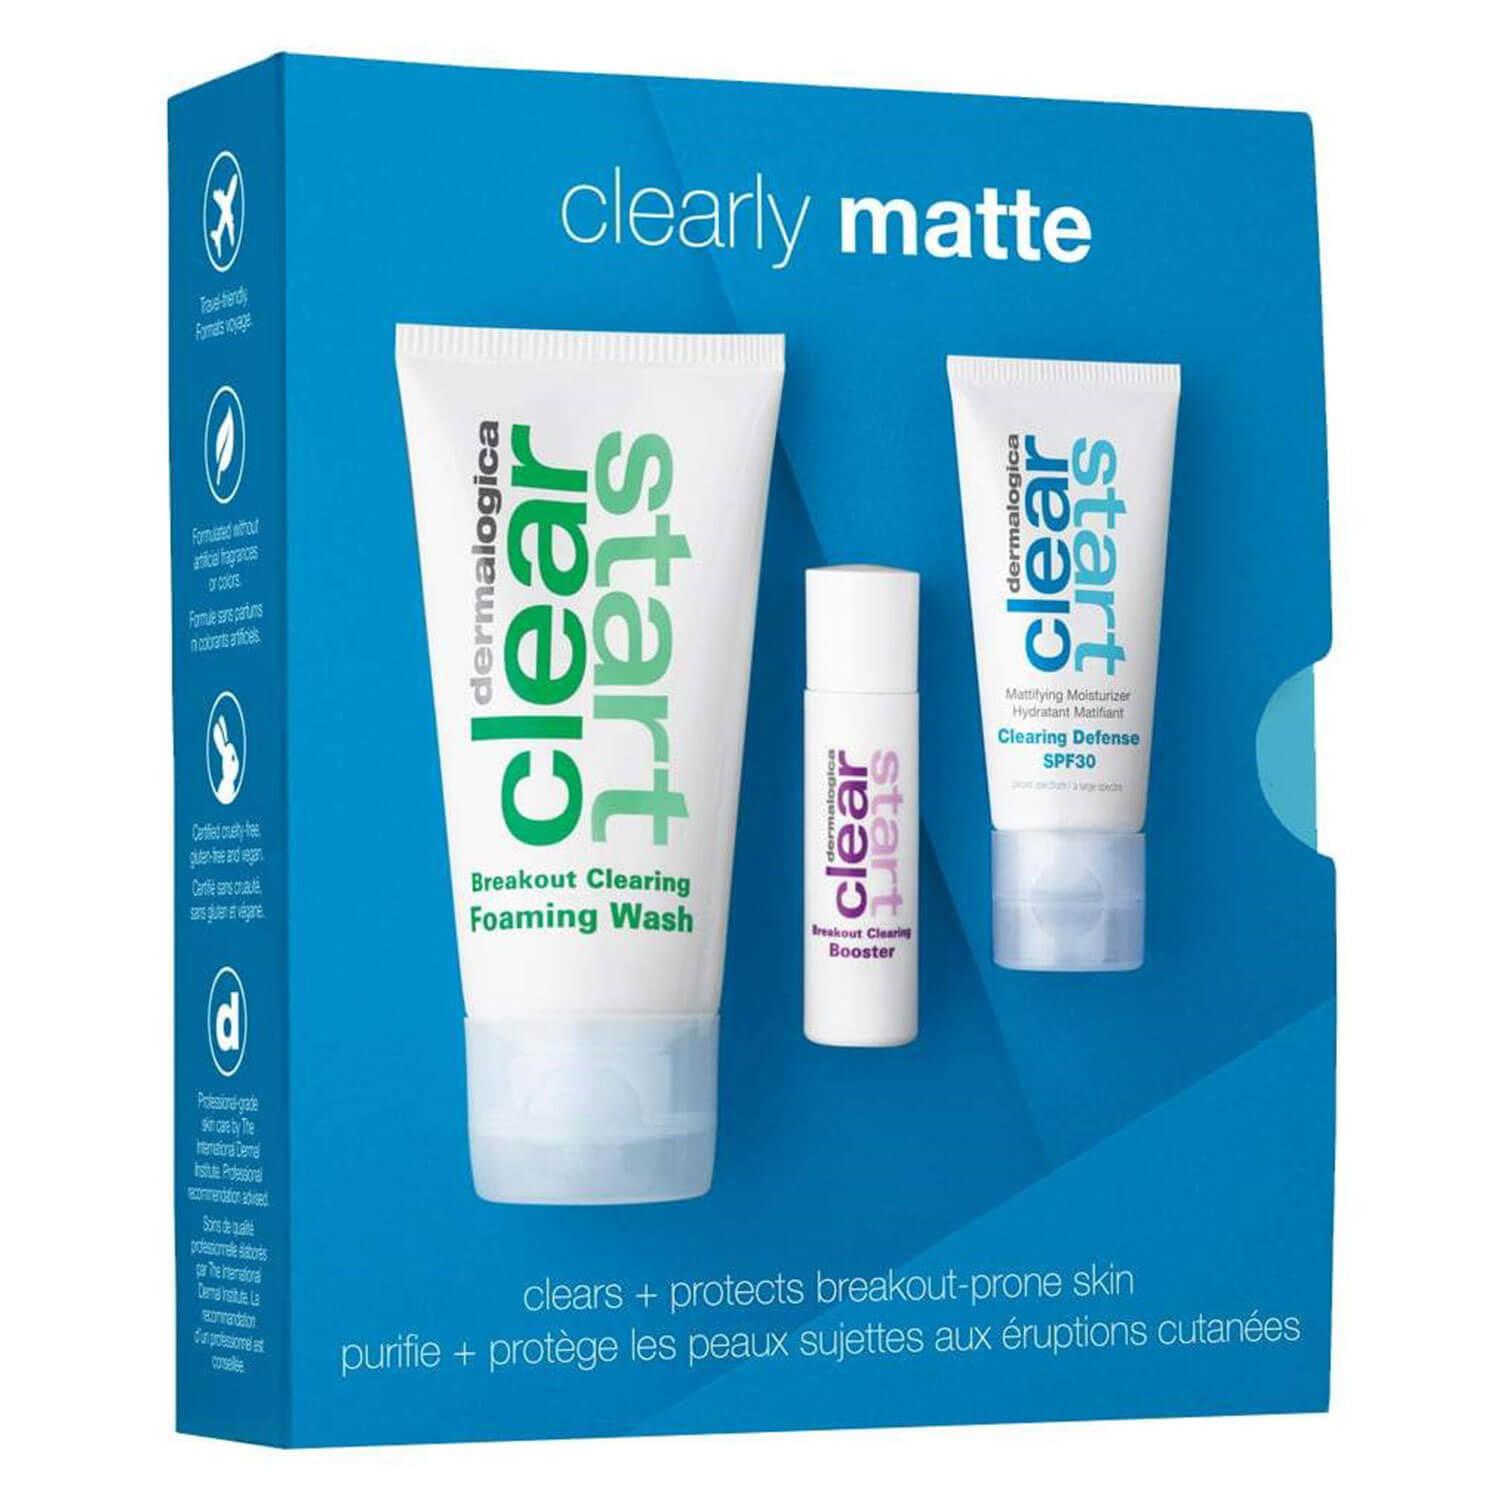 Clear Start - Clearly Matte Skin Kit